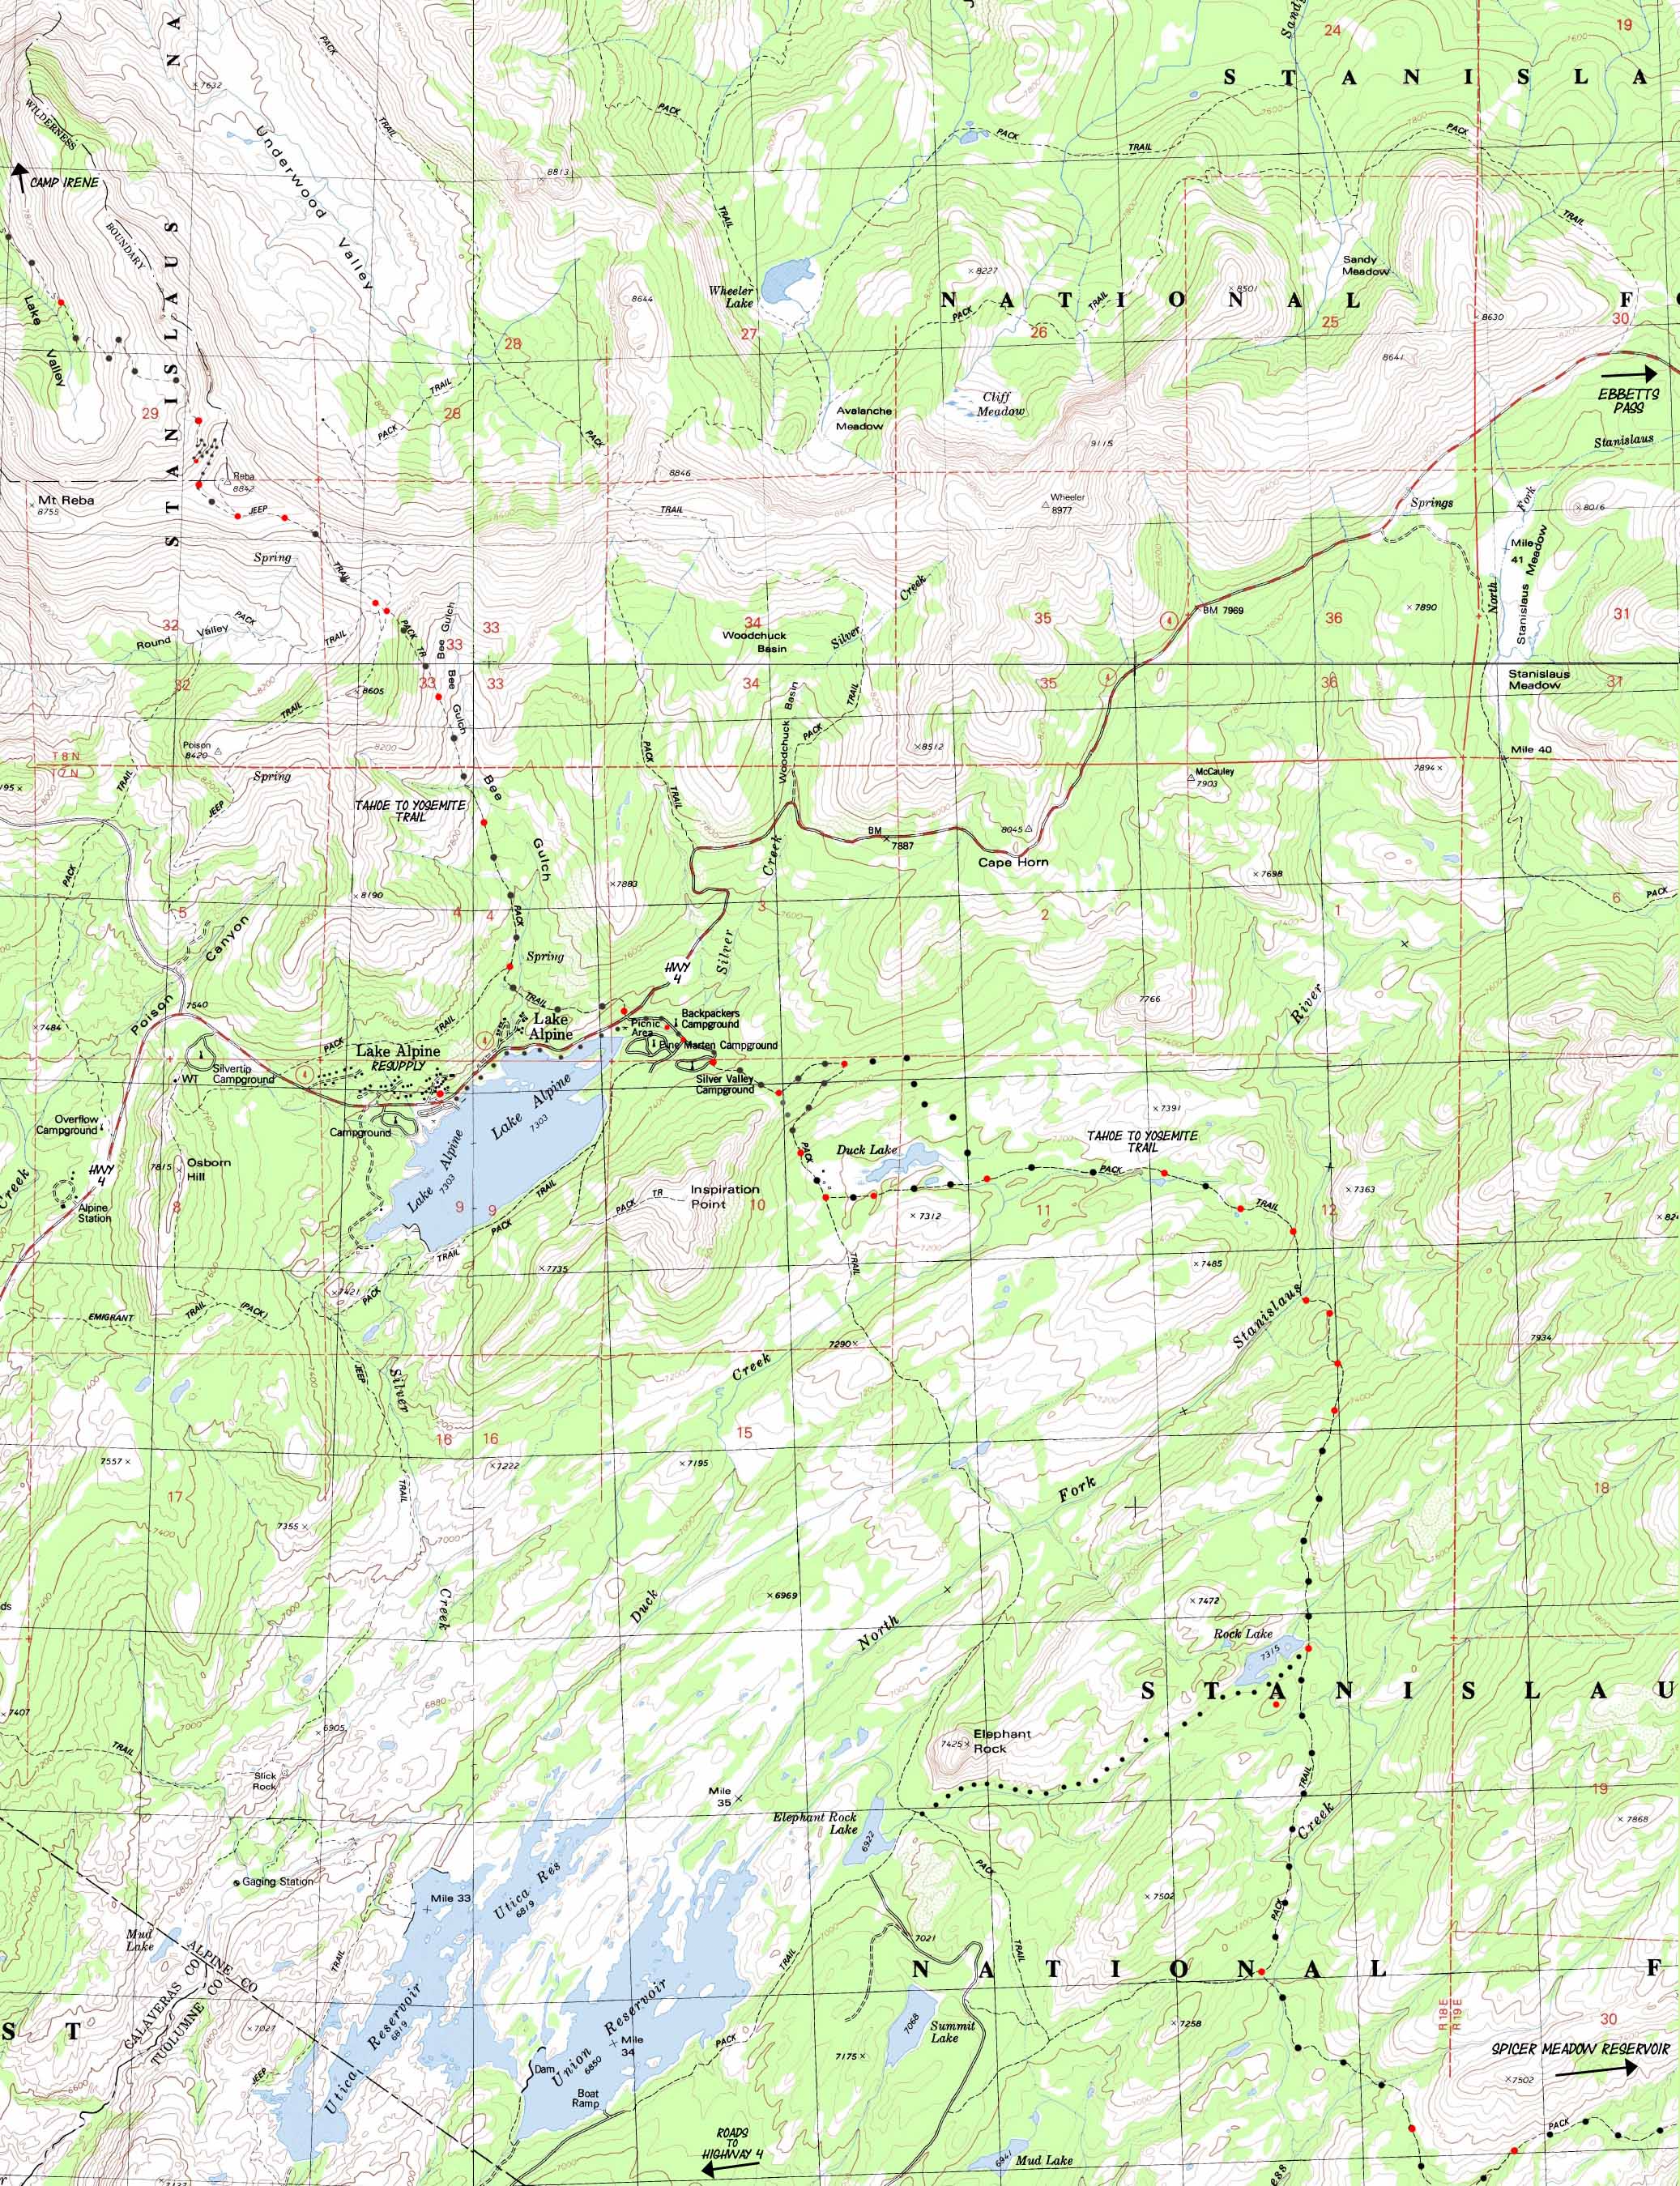 Lake Alpine, Spicer Meadow Reservoir backpacking map.